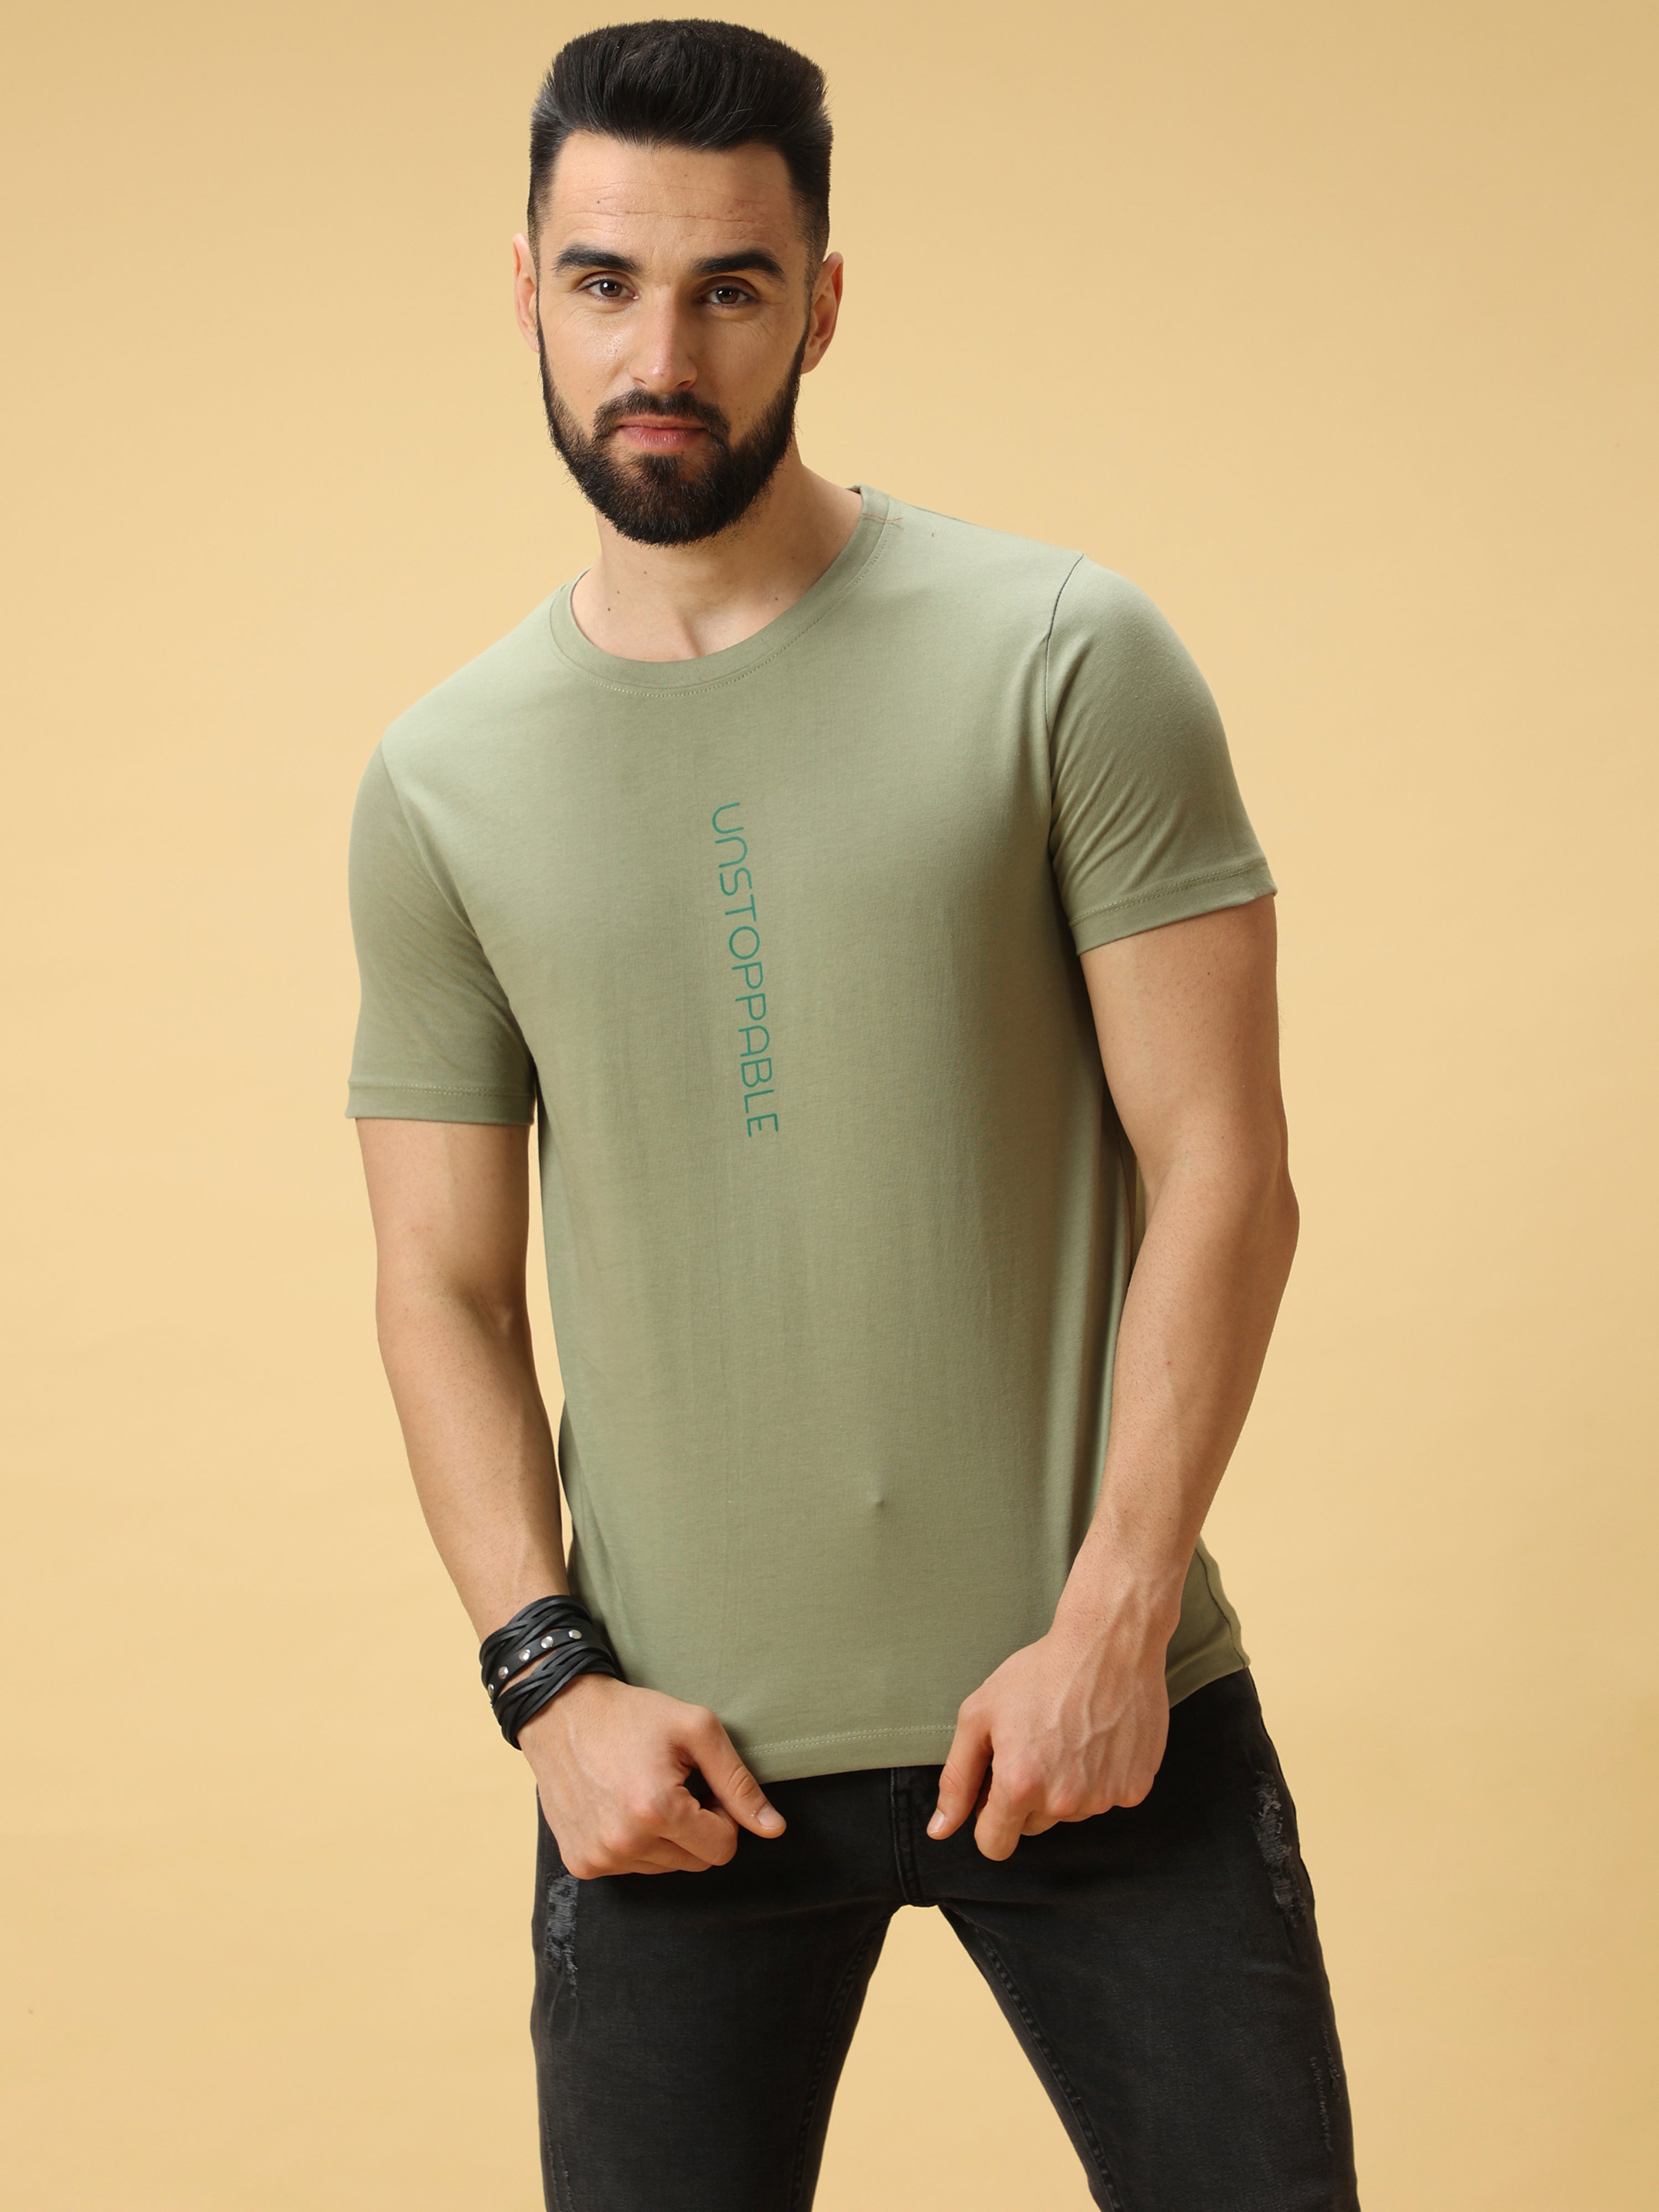 Unstoppable Green Print Crew Neck T-Shirt shop online at Estilocus. This pure cotton printed T-shirt is a stylish go-to for laidback days. Cut in a comfy regular fit. • 100% Cotton knitted interlock 190GSM• Bio washed fabric• Round neck T-shirt • Half sle